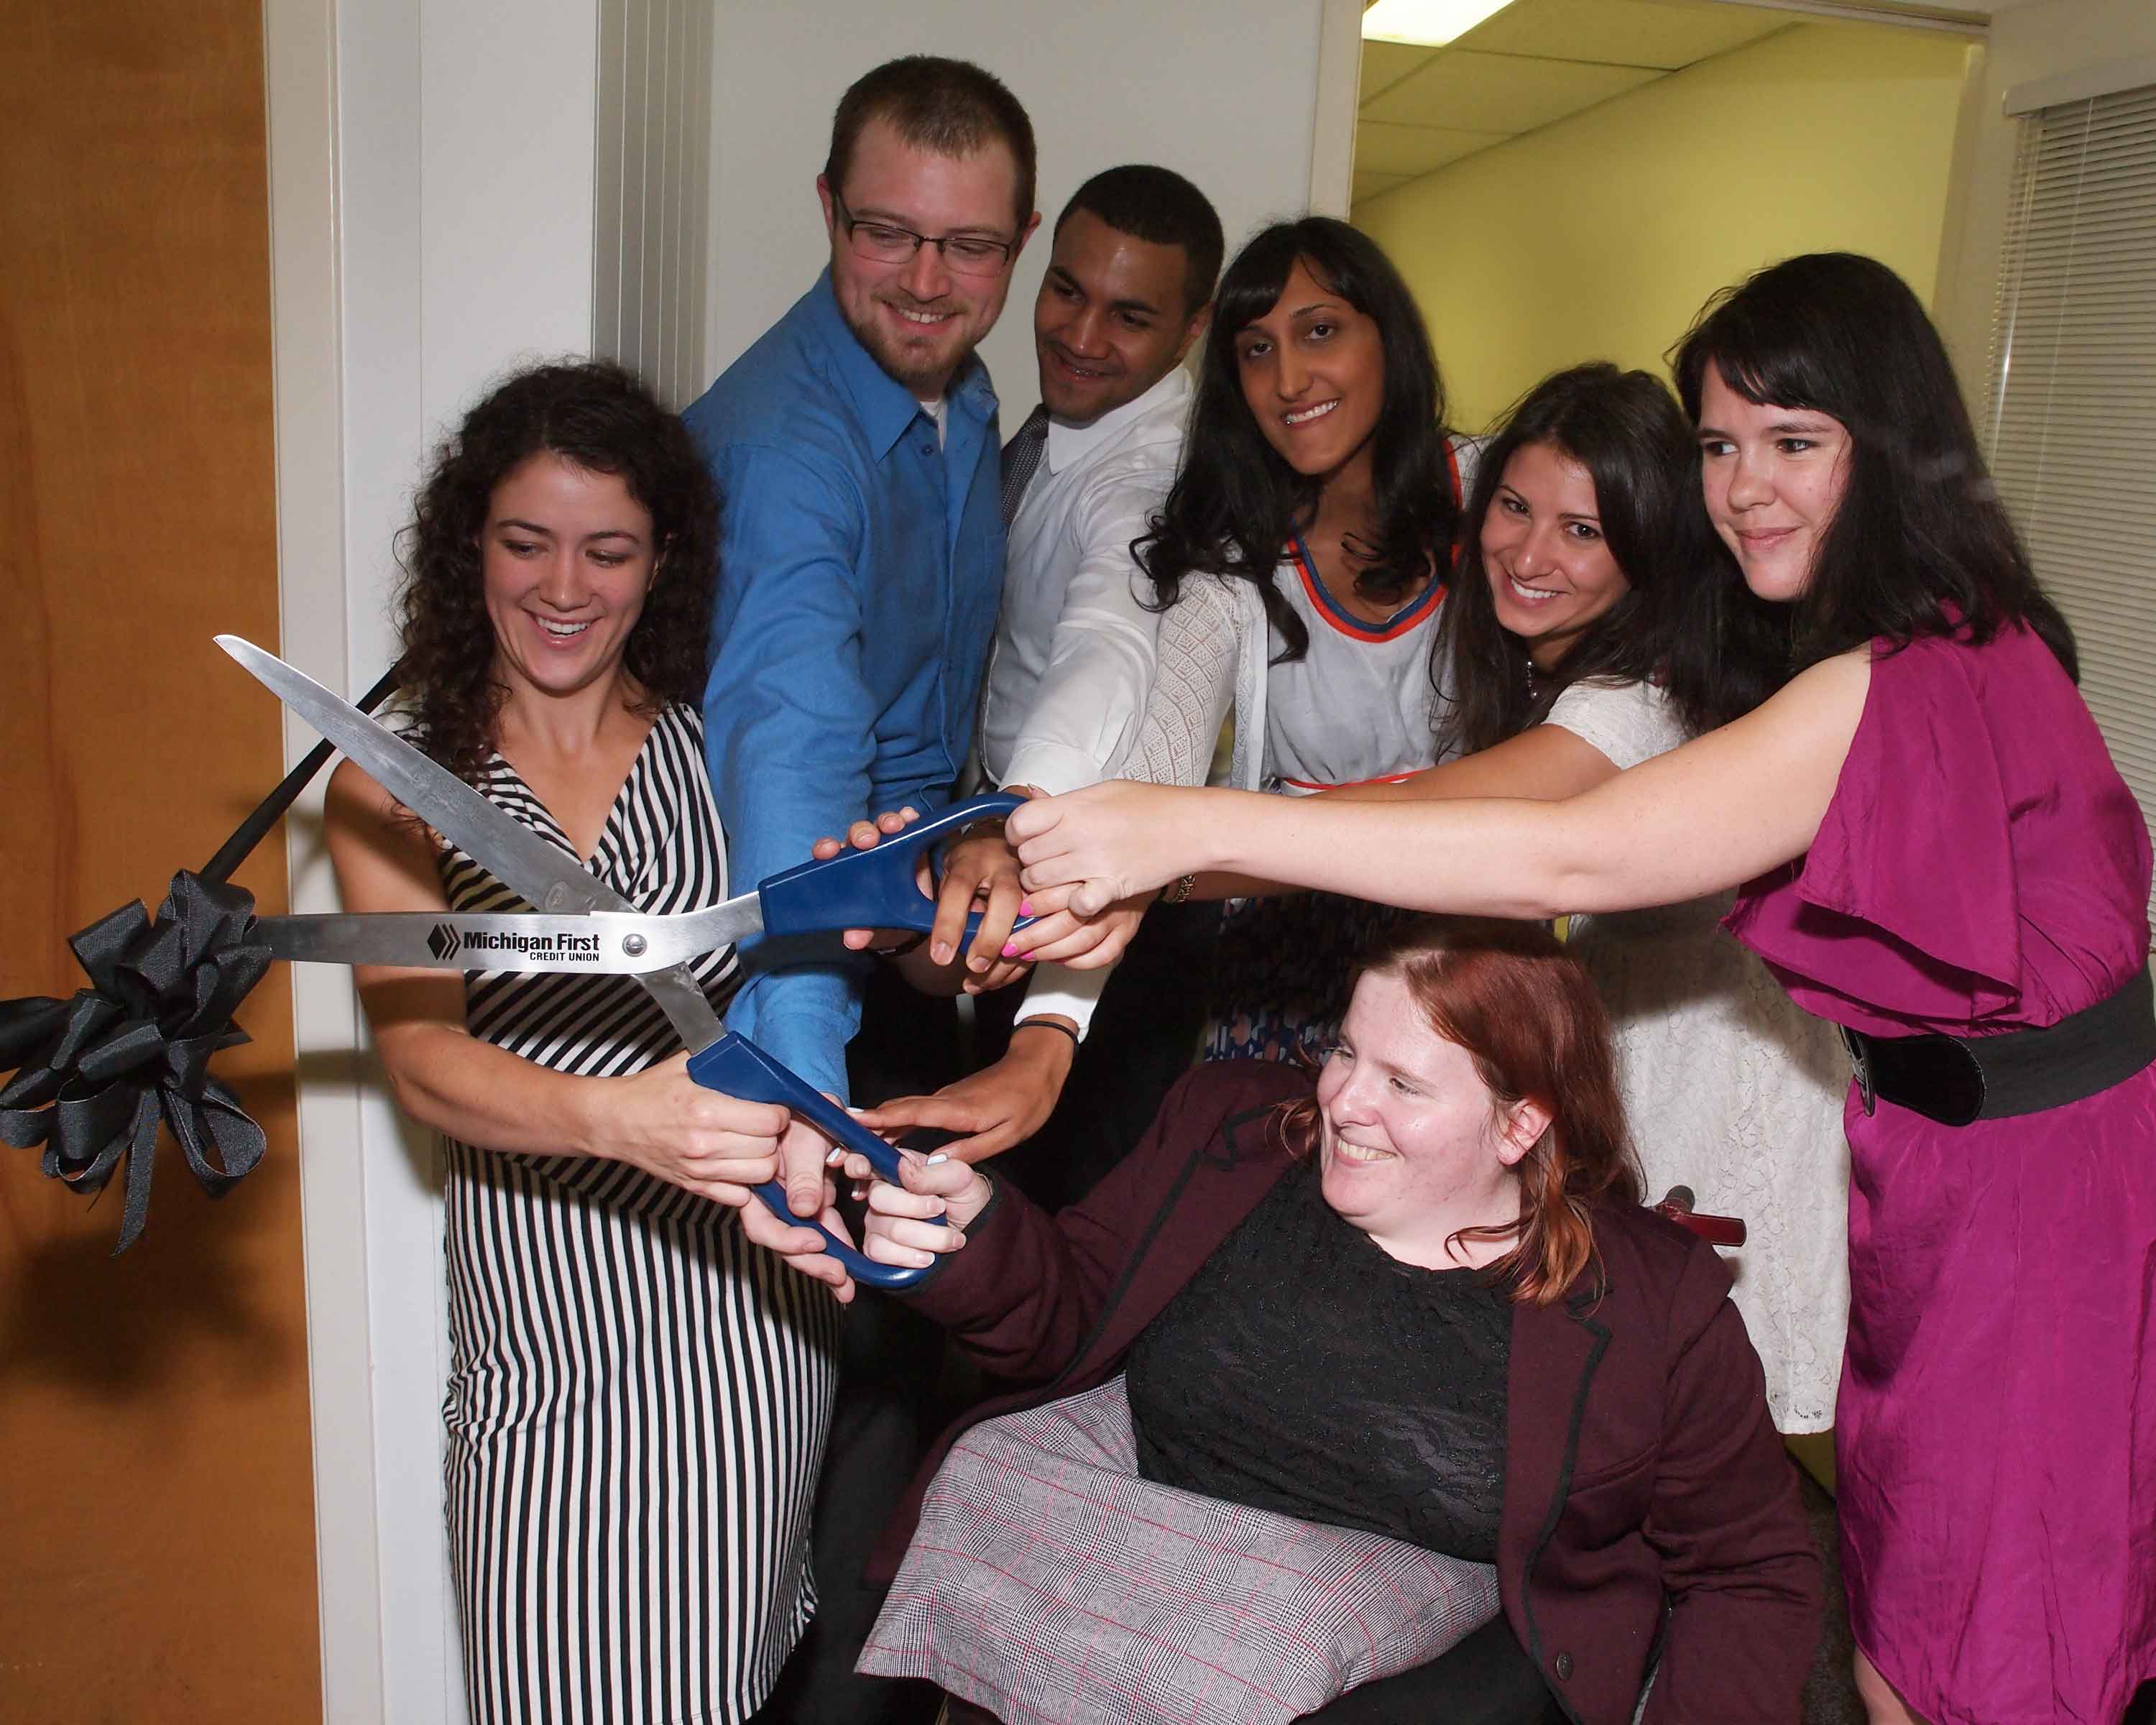 Group of people cutting a ribbon with large scissors